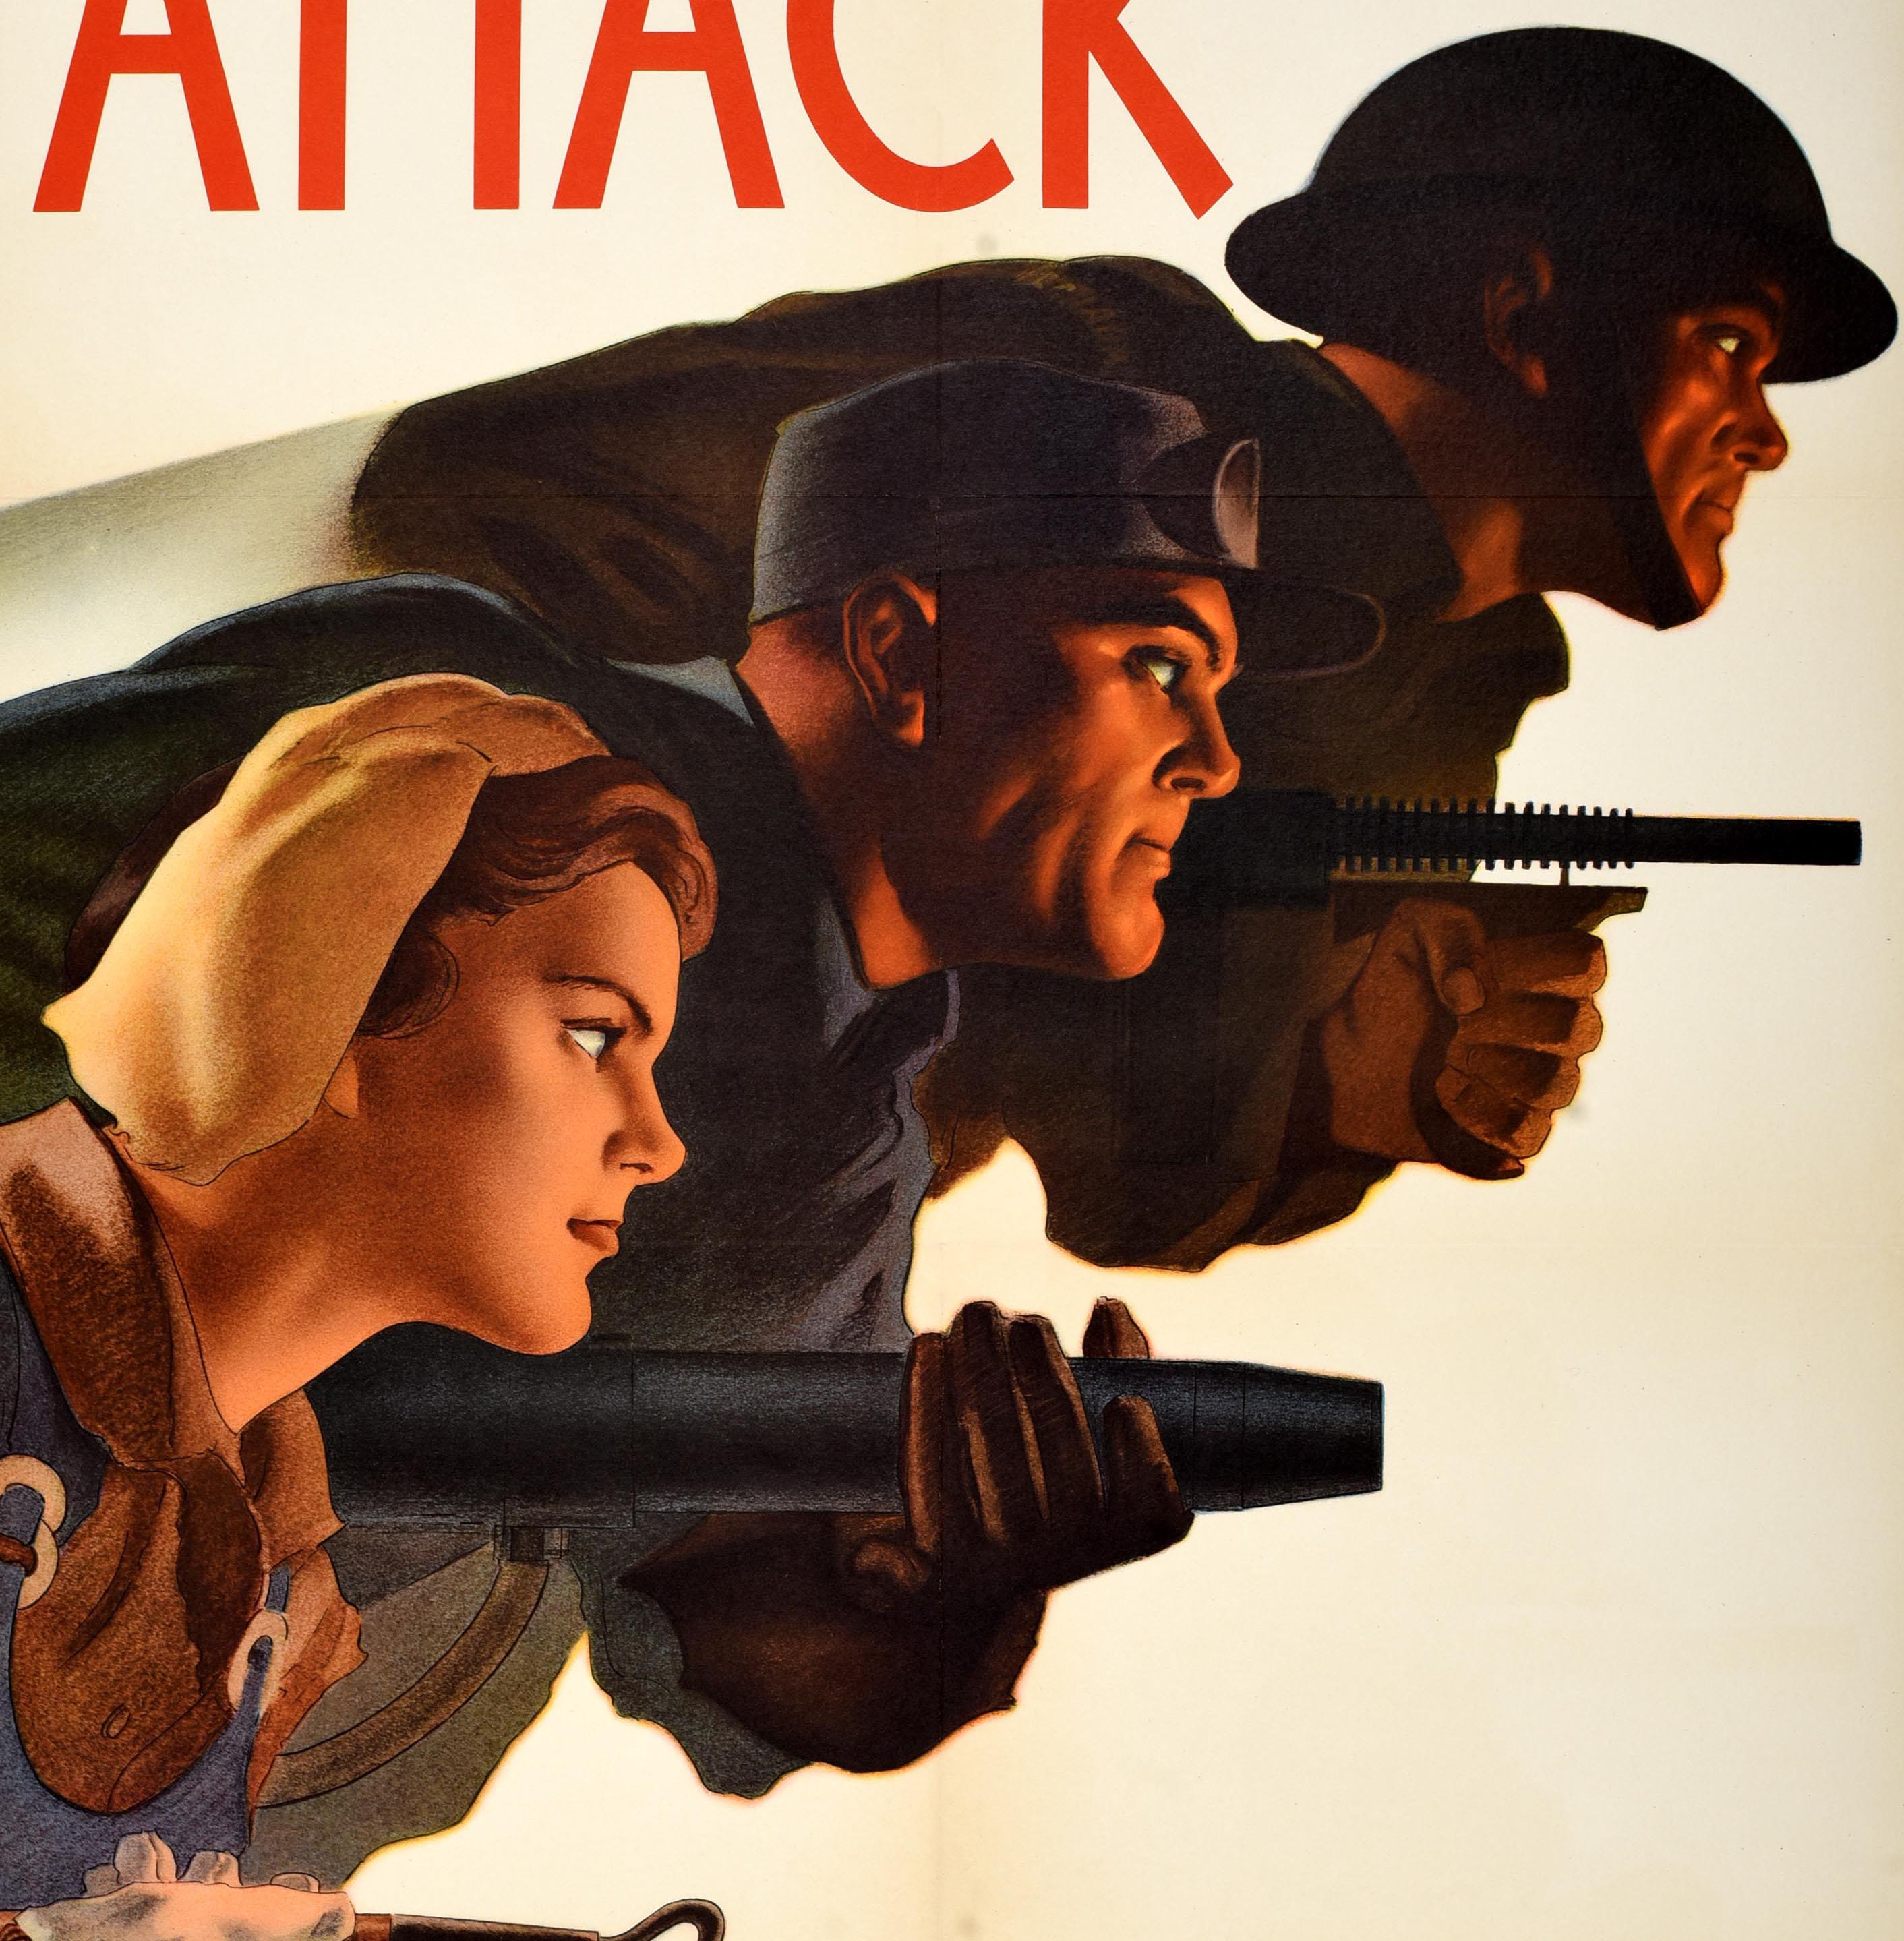 Original vintage World War Two poster - Attack On All Fronts - featuring a dynamic design by Hubert Rogers (1898-1982) depicting three people leaning forward side by side in a diagonal row, a soldier in military uniform and helmet holding a gun with